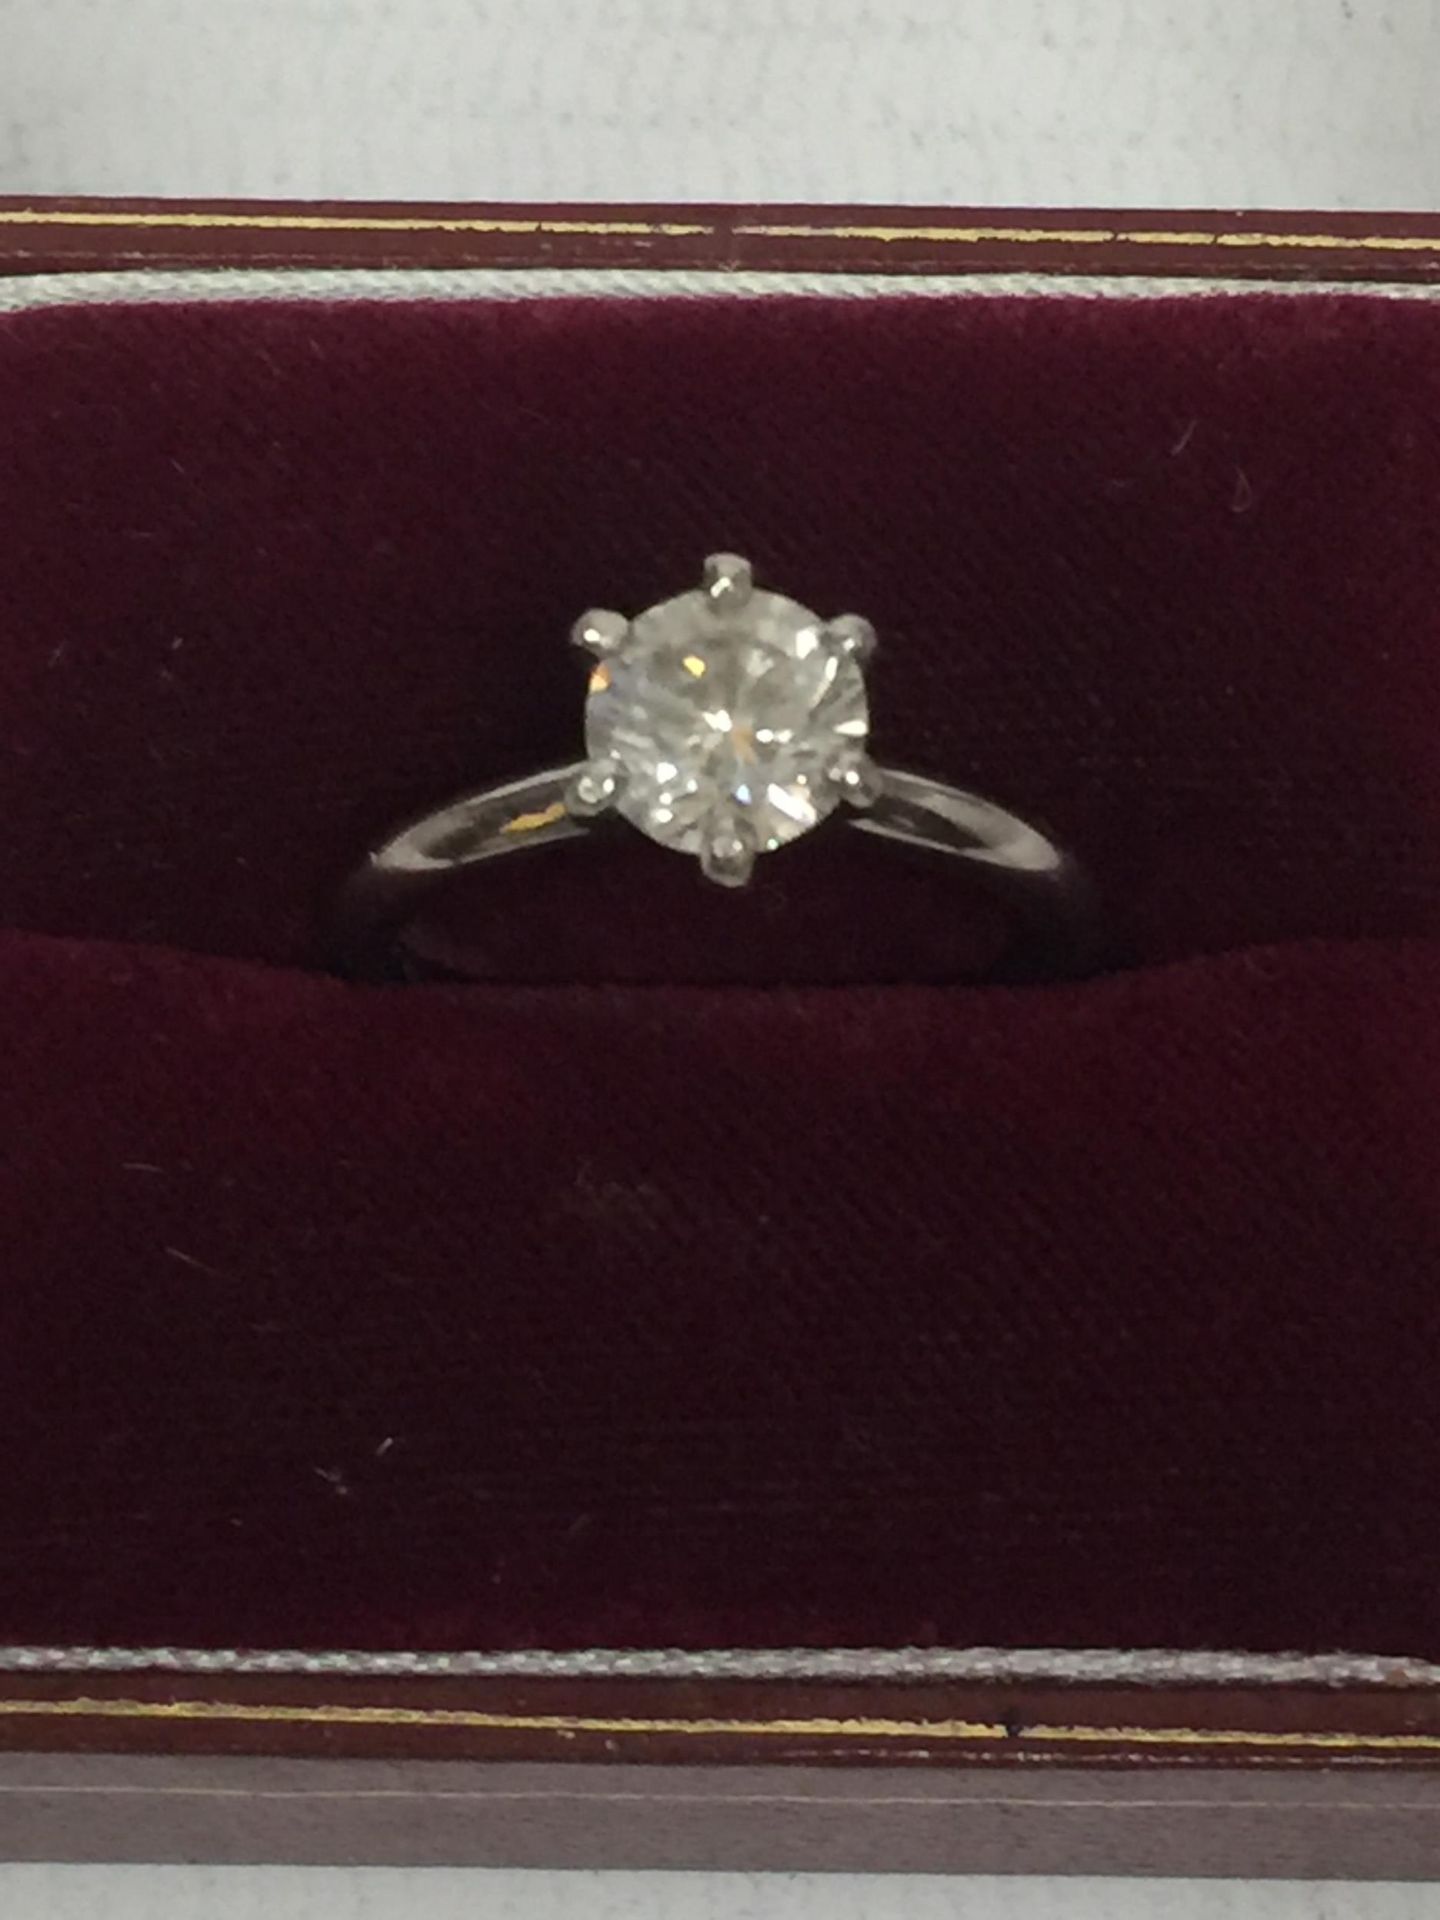 A PLATINUM (PT950) RING WITH A ONE CARAT SOLITAIRE DIAMOND SIZE M - Image 3 of 4